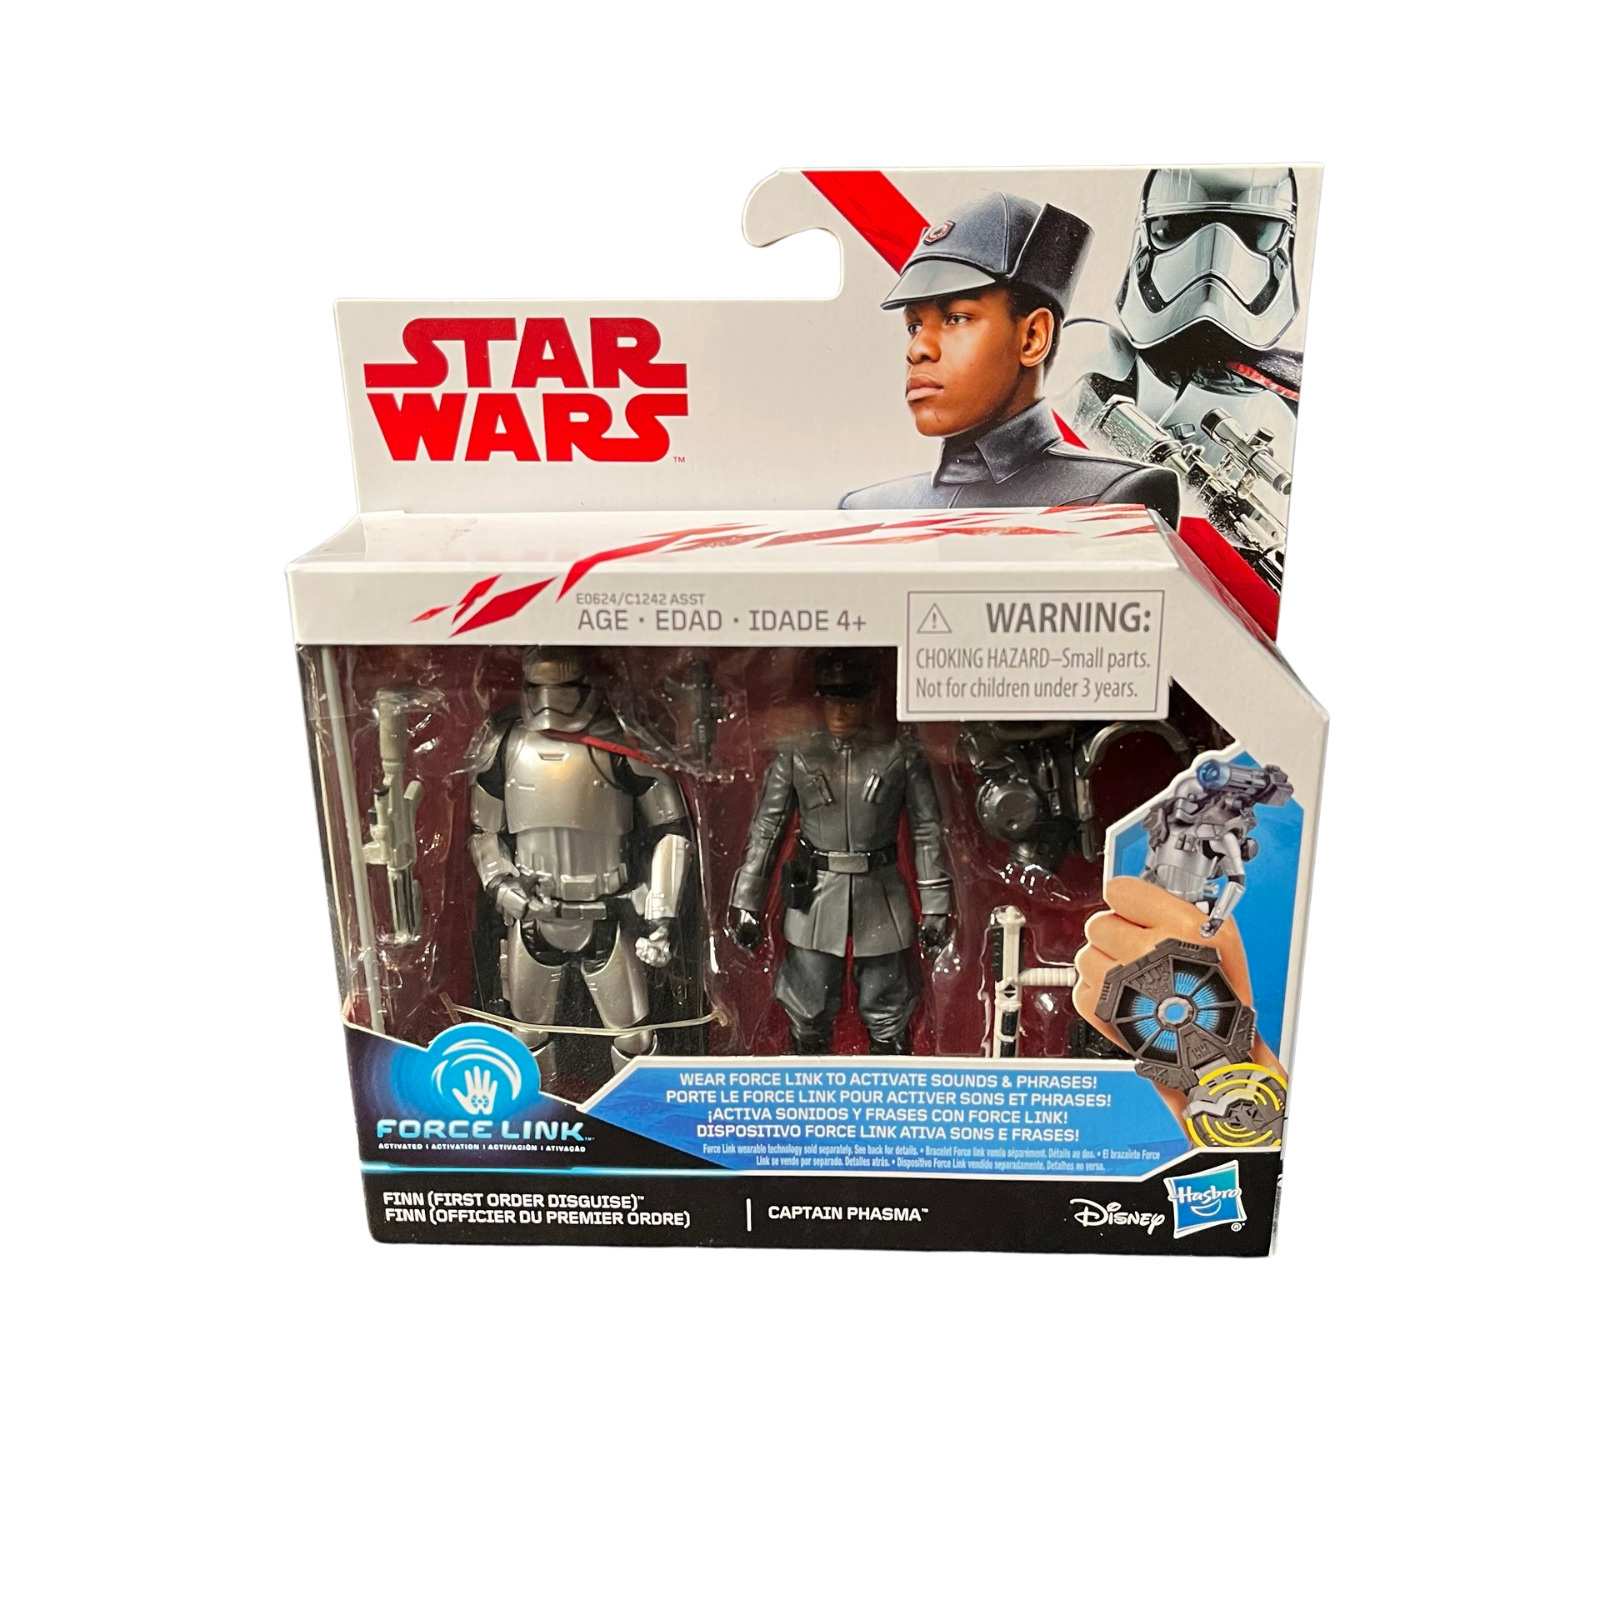 STAR WARS FORCE LINK FINN (FIRST ORDER DISGUISE), CAPTAIN PHASMA 2PK New Sealed